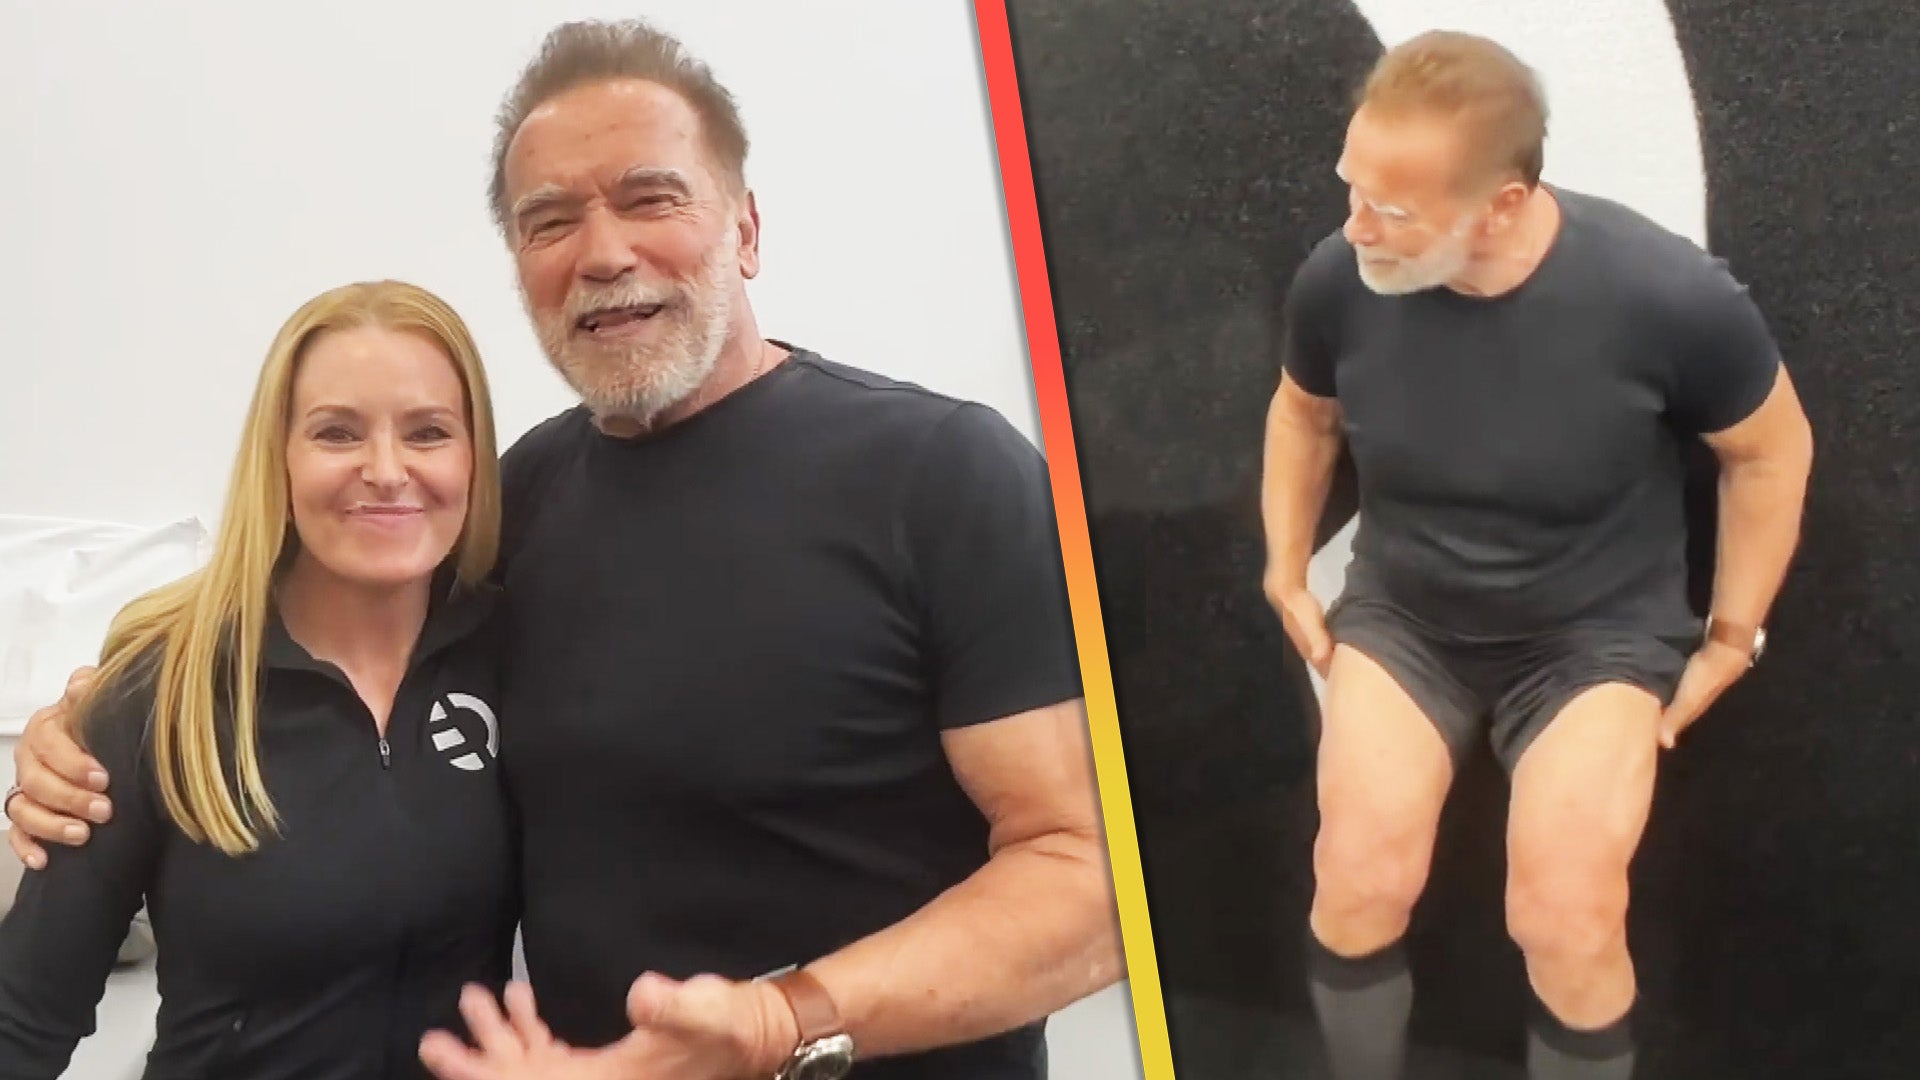 Arnold Schwarzenegger and Physical Therapist Girlfriend Share Their Fitness Routine